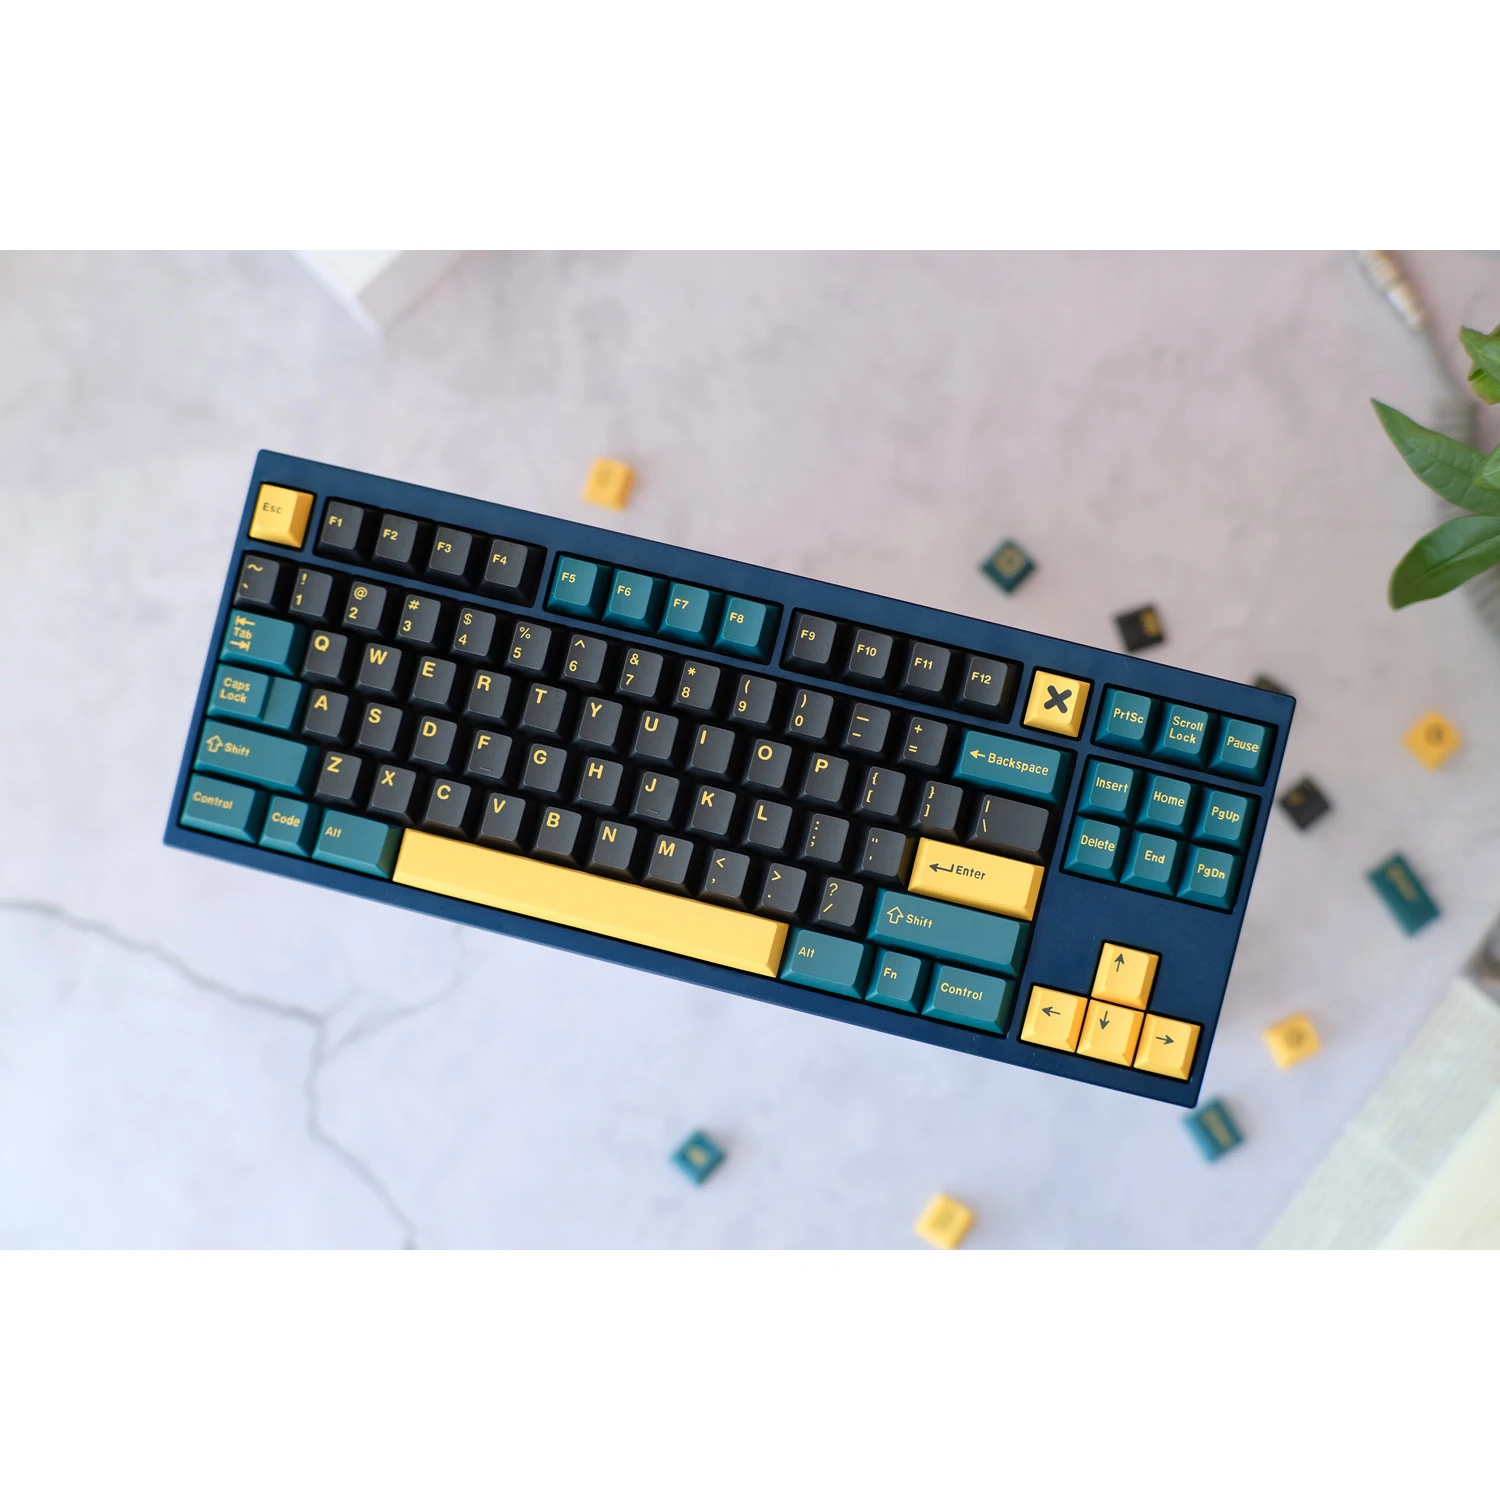 GMKY 173 Keycaps Cherry Profile DOUBLE SHOT Thick PBT Keycaps ABS Font for MX Switch Mechanical Keyboard